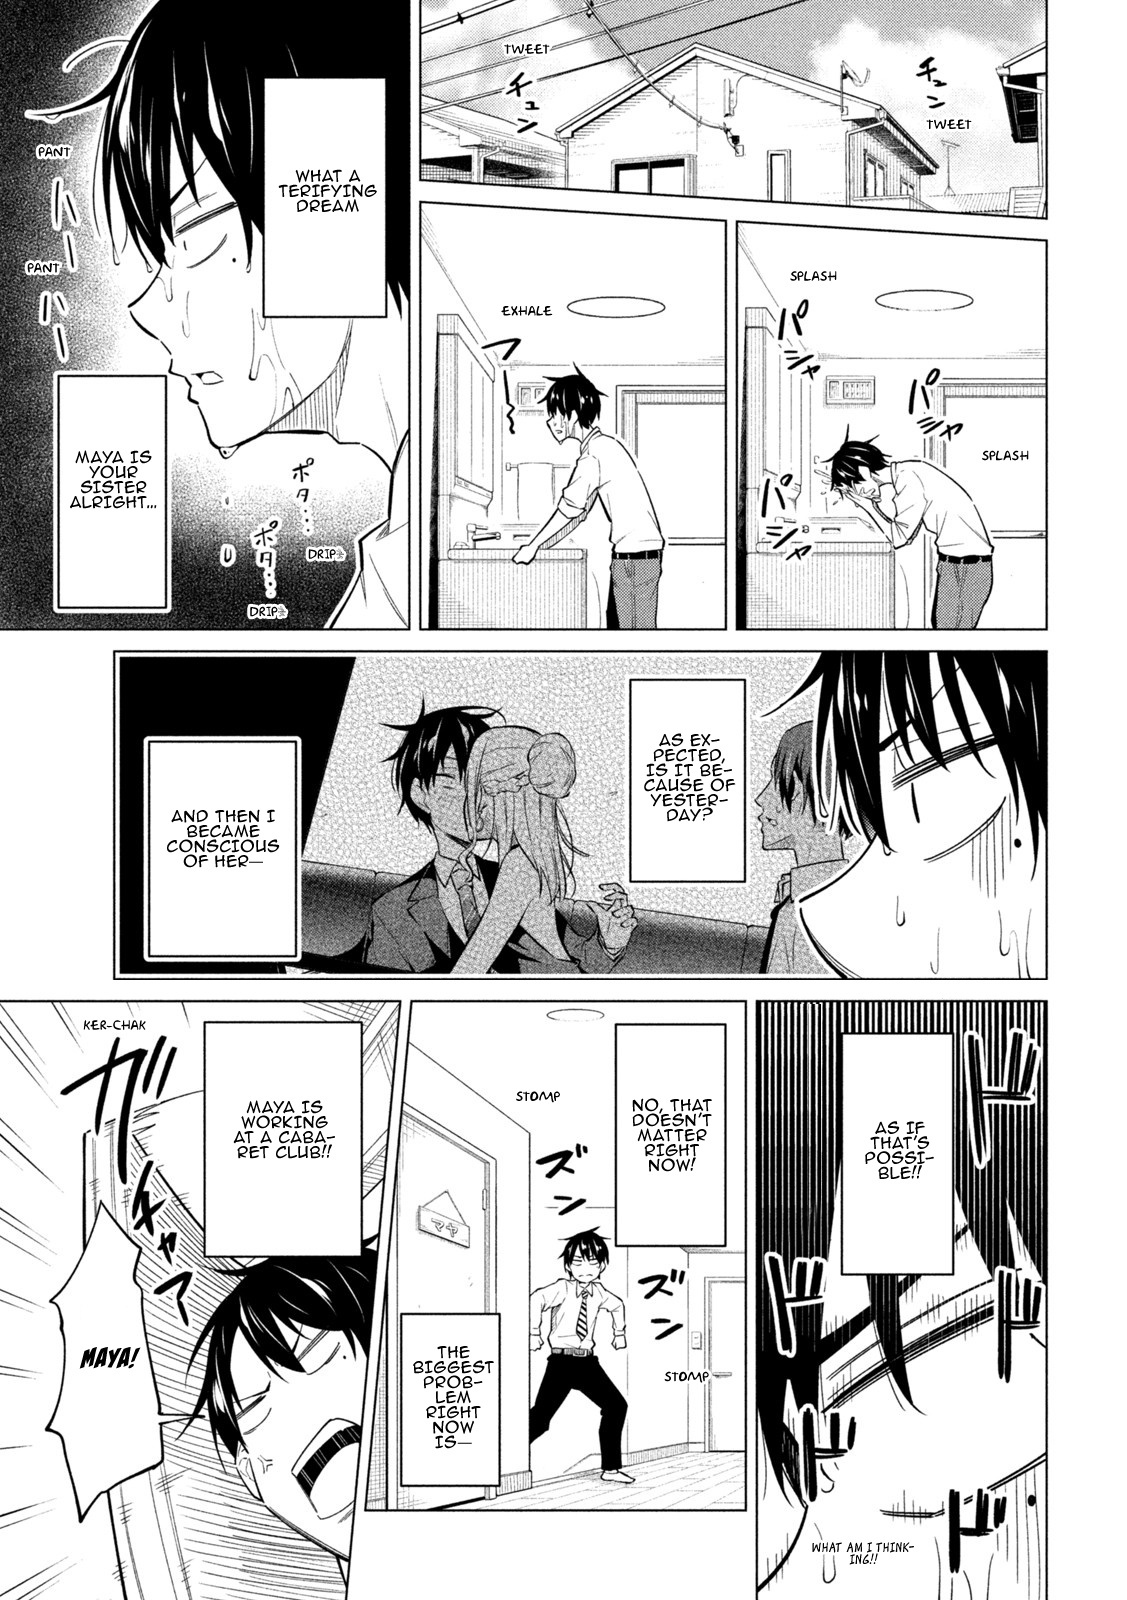 Home Cabaret ~Operation: Making A Cabaret Club At Home So Nii-Chan Can Get Used To Girls~ Chapter 2 #3